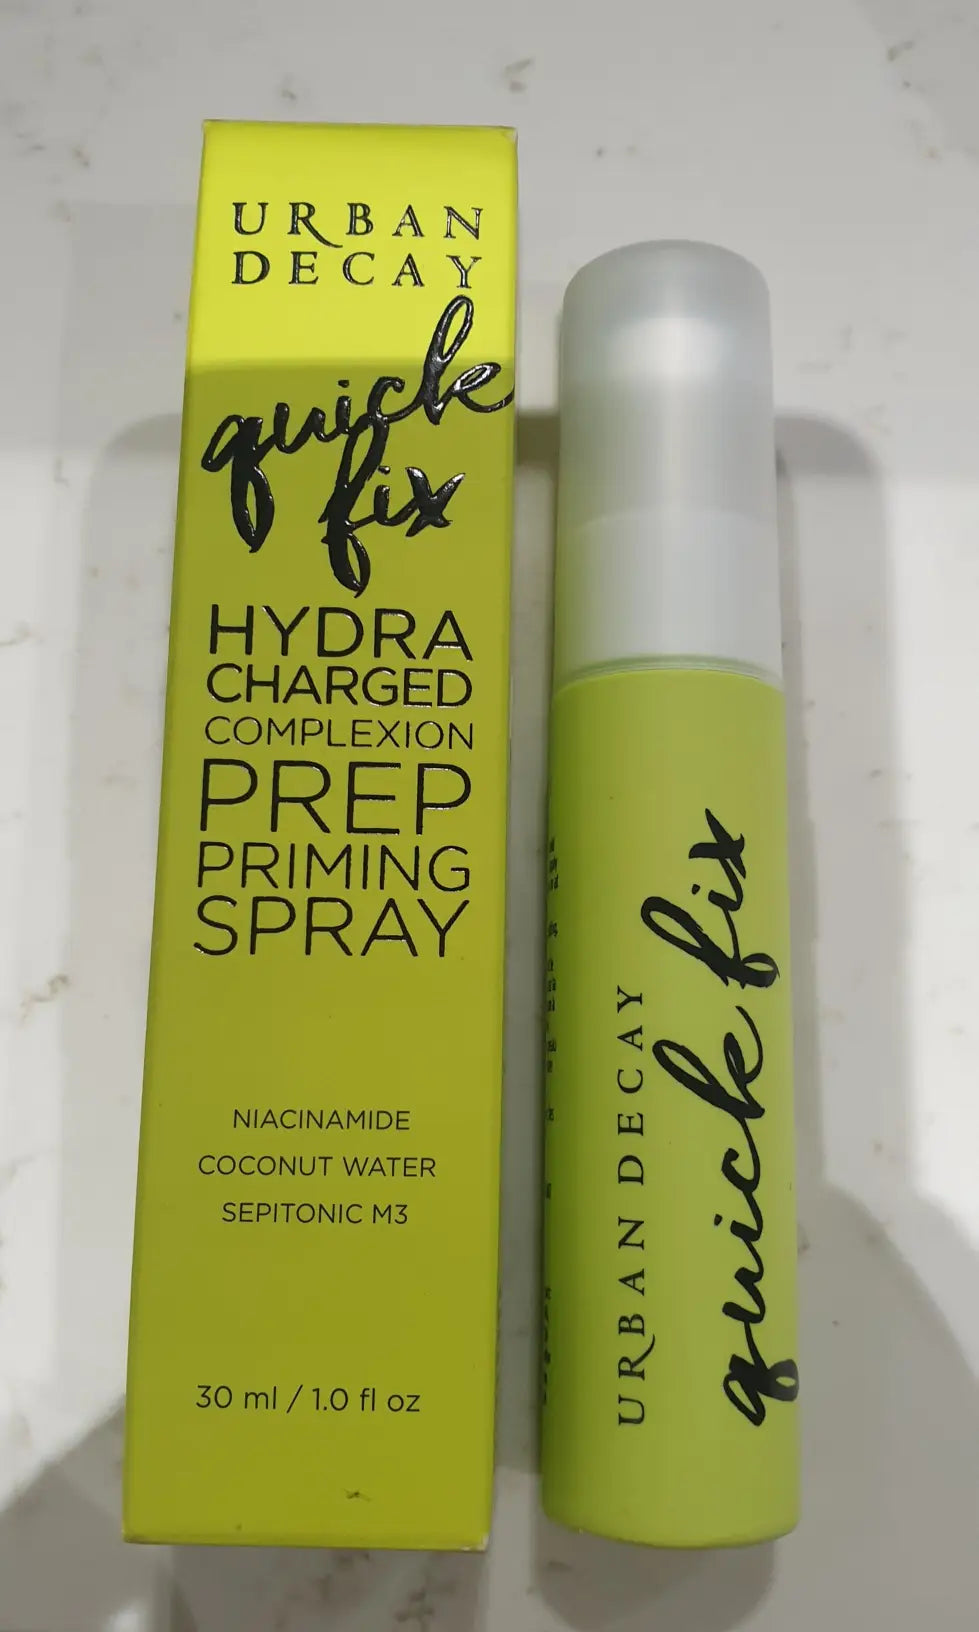 Urban Decay Hydra Charged Complexion Prep Priming Spray, 30Ml